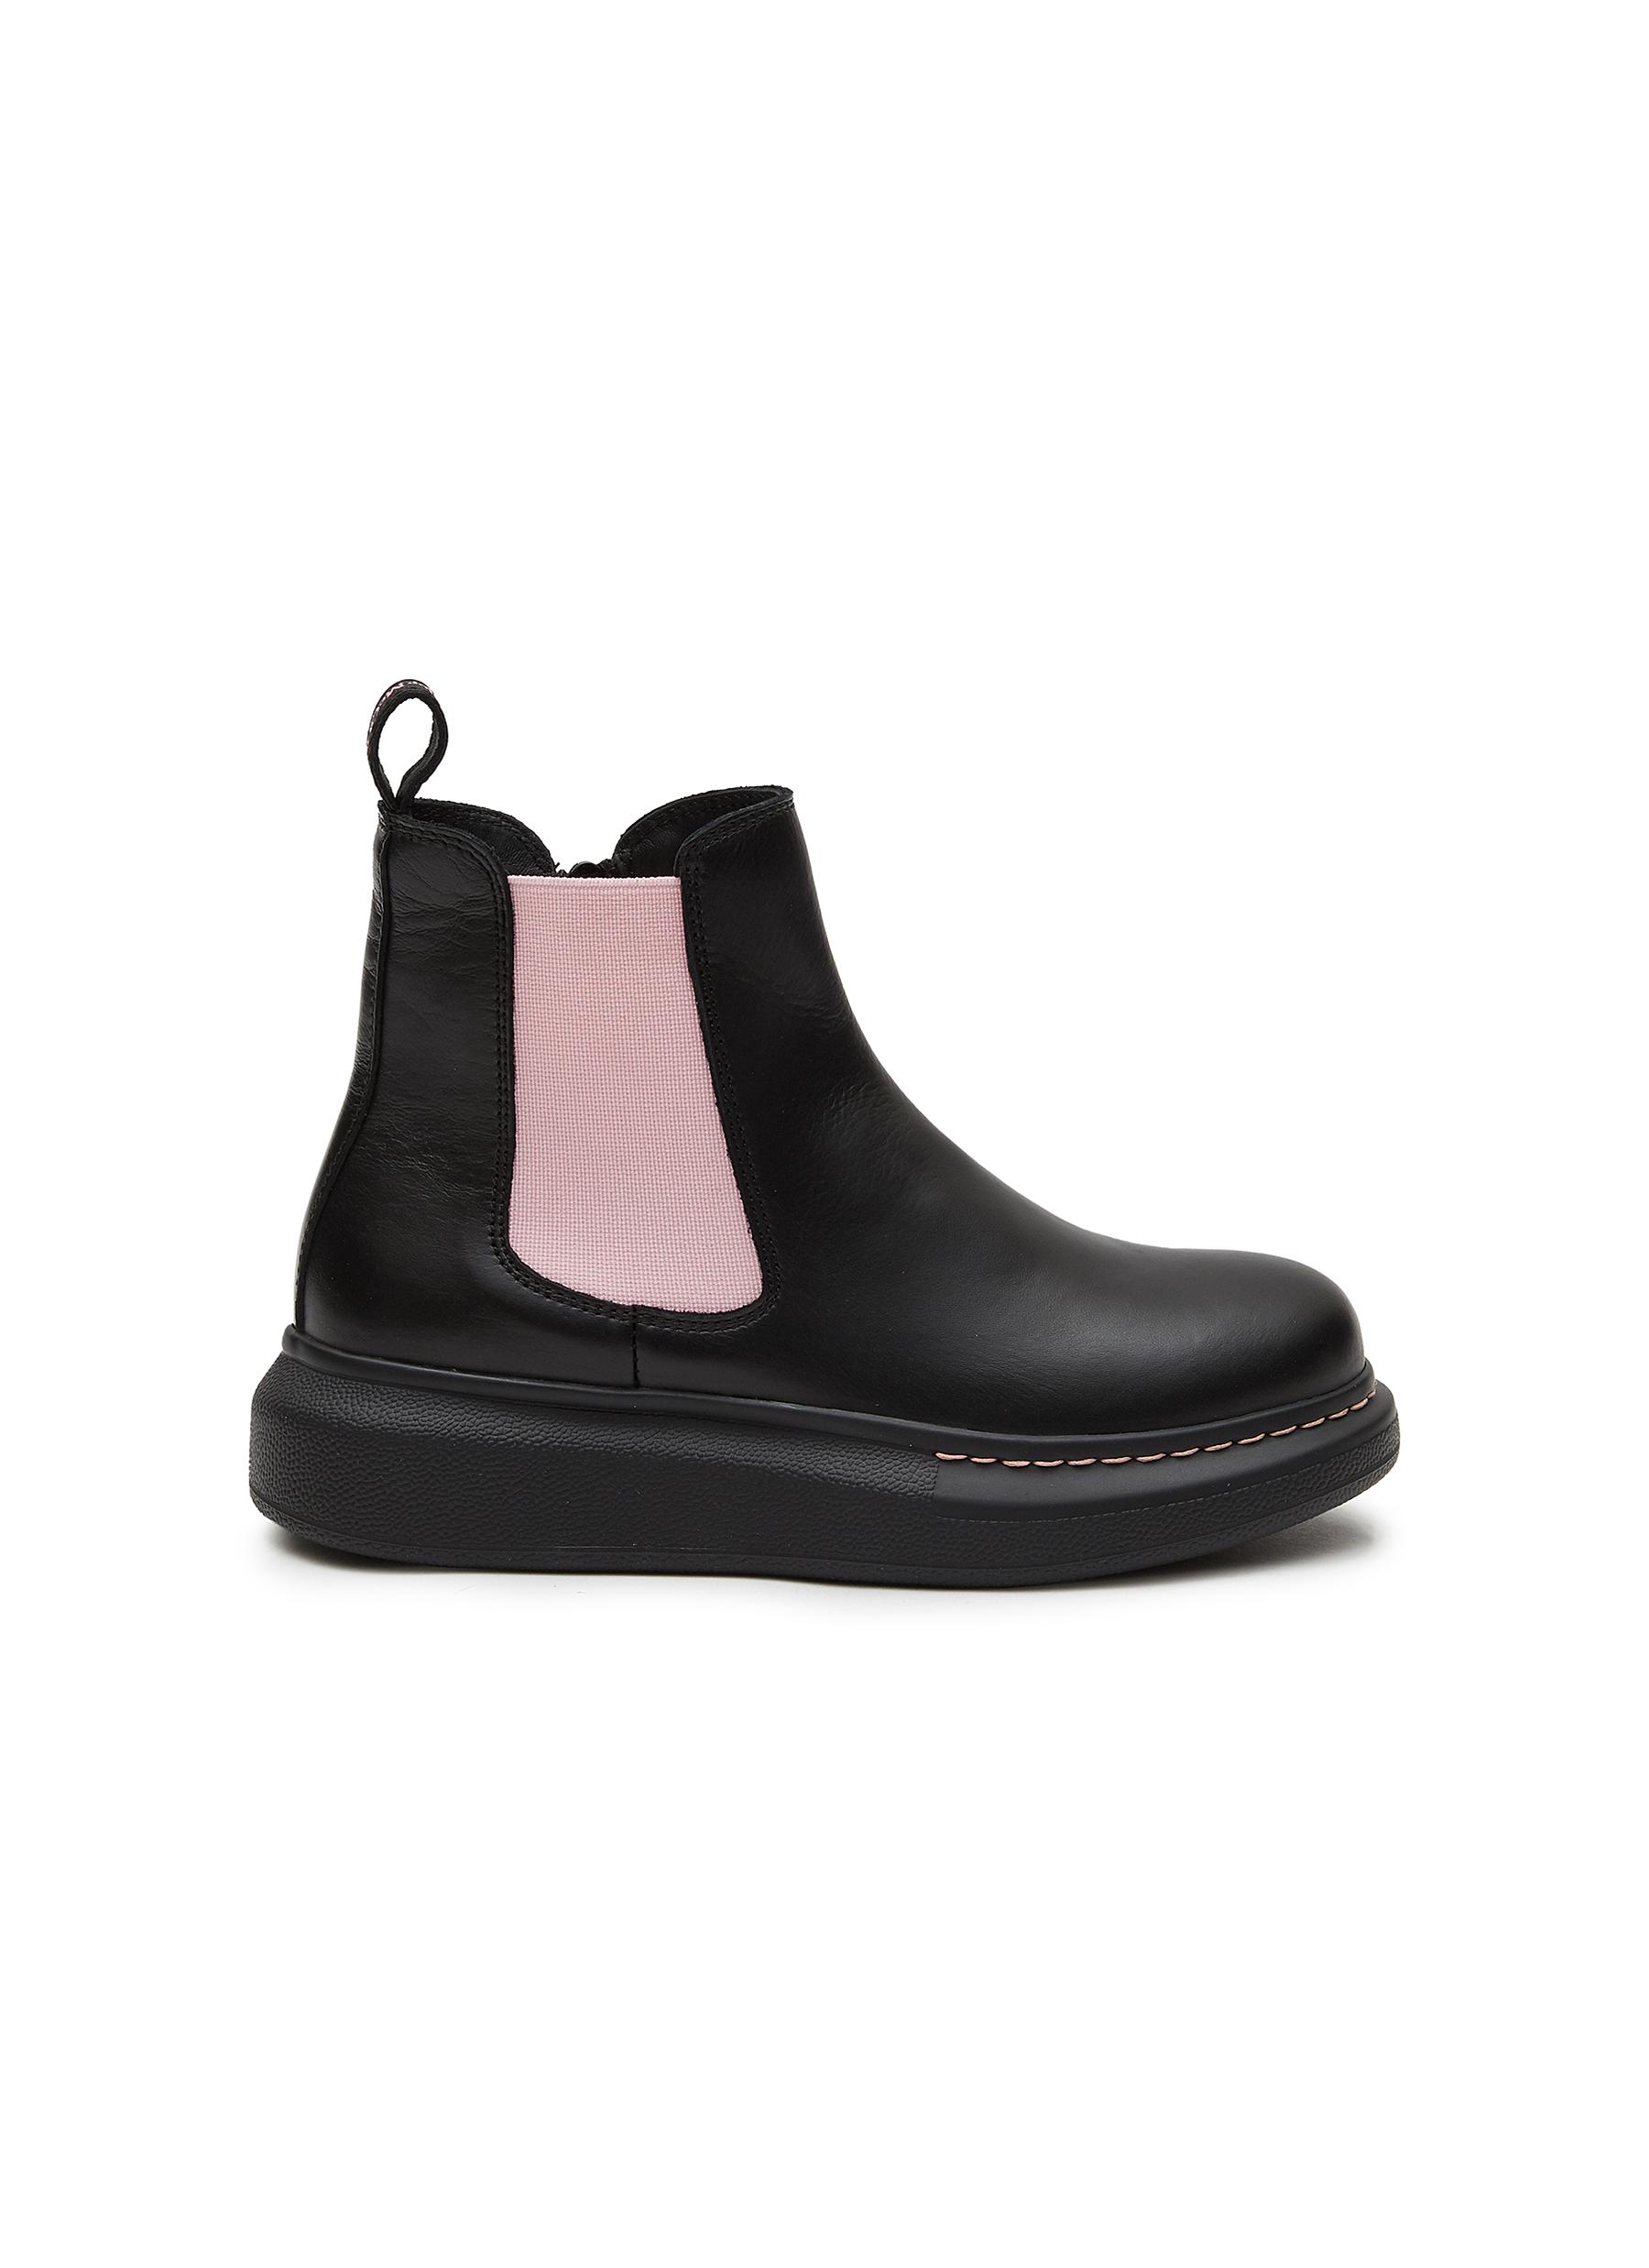 'Molly' Kids And Toddlers Leather Platform Chelsea Boots